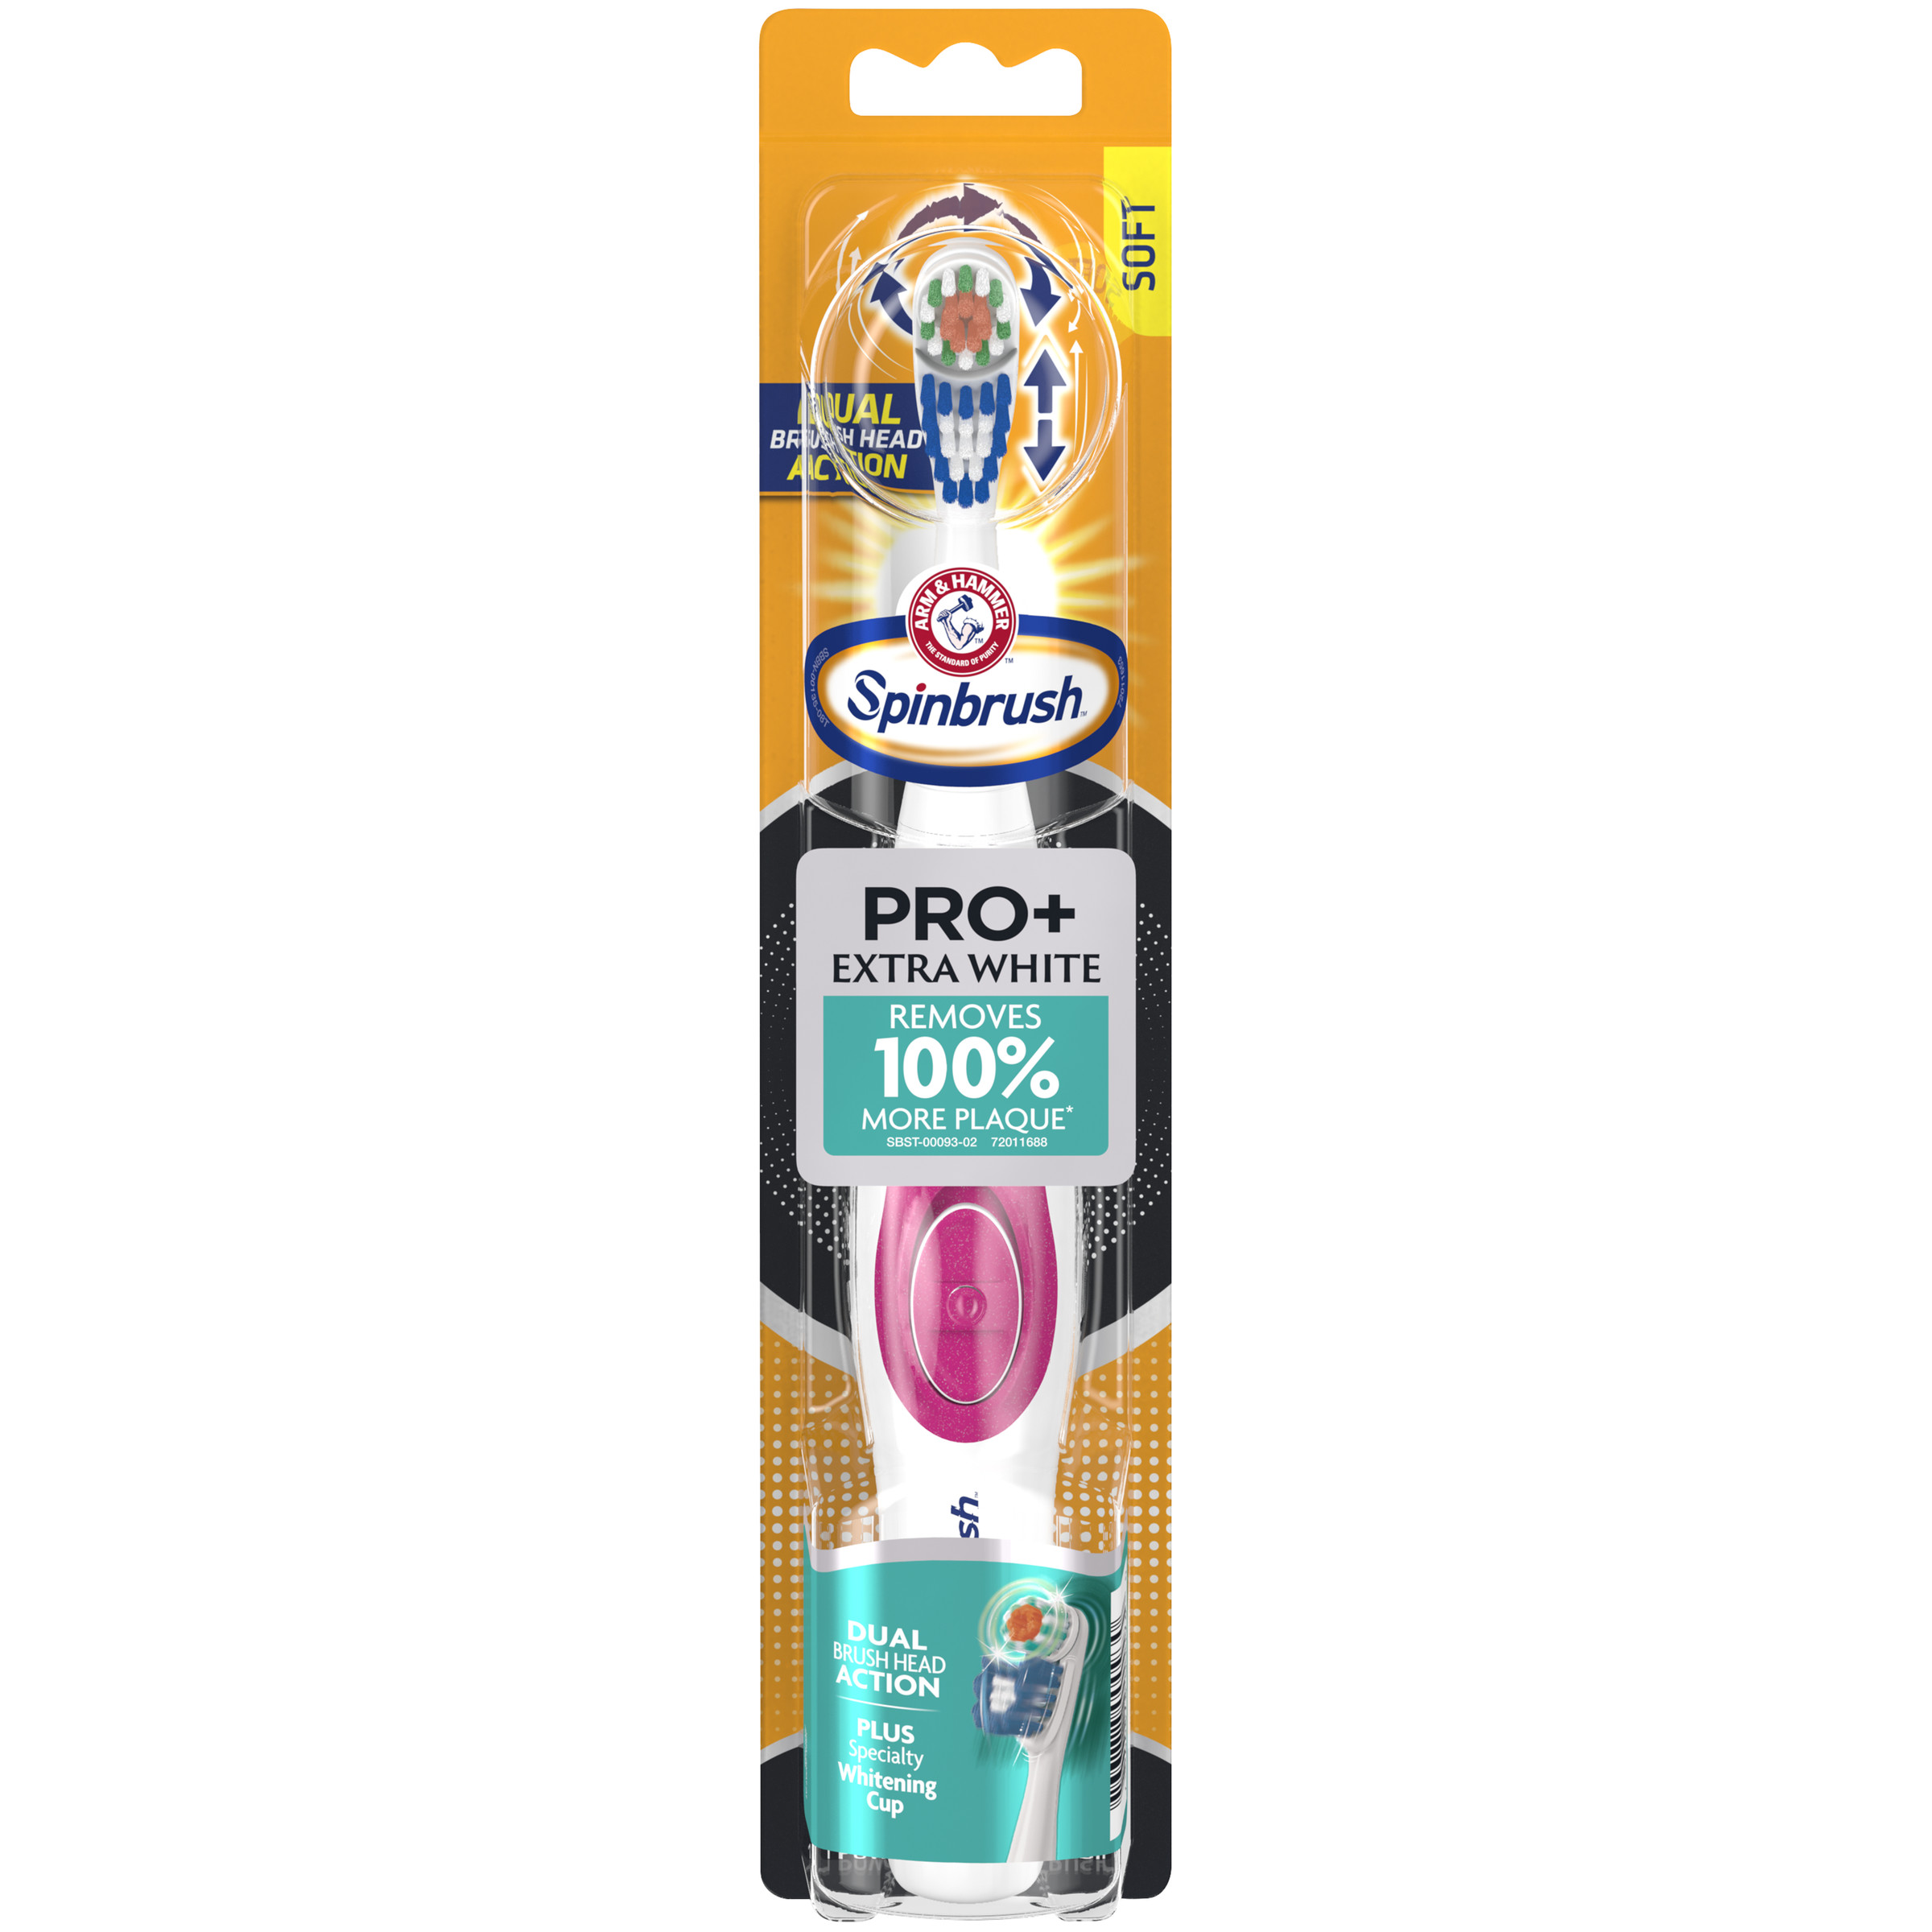 Spinbrush PRO+ Extra White Battery Powered Toothbrush for Adults, Soft Bristles with Whitening Cup - image 1 of 8